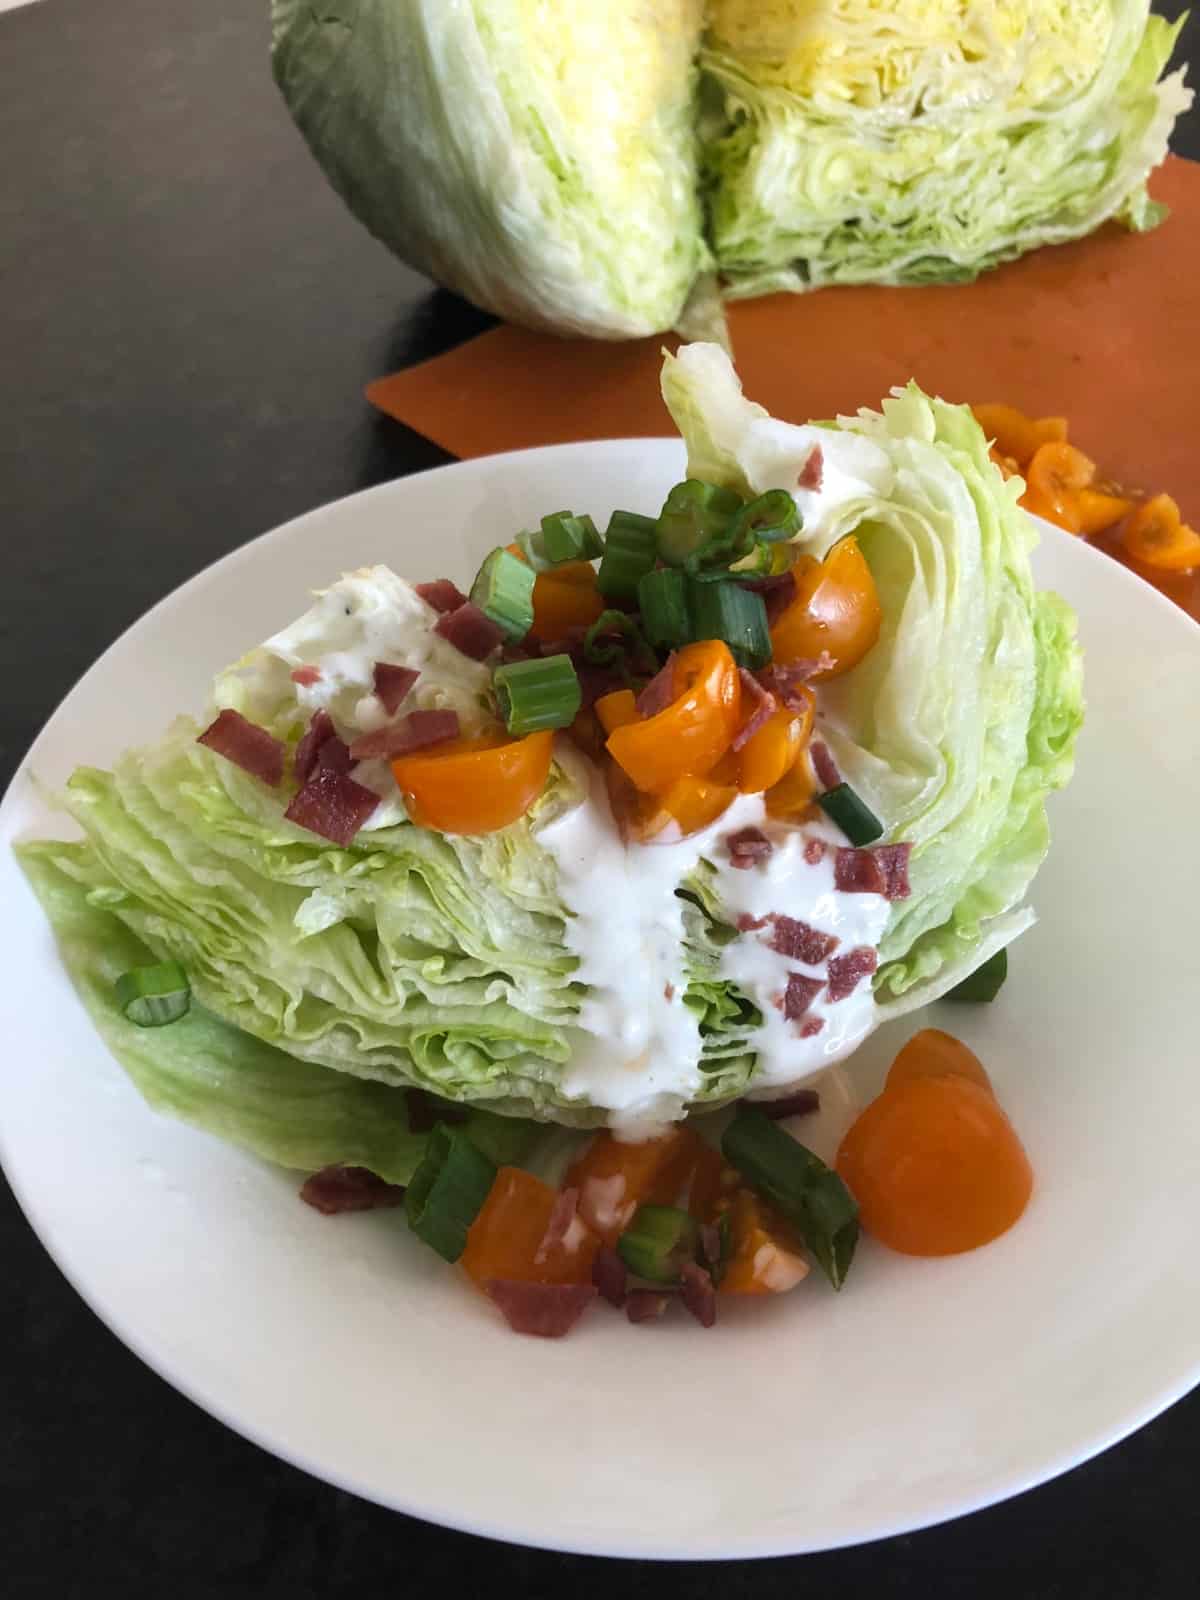 Iceberg lettuce wedge drizzled with blue cheese dressing, topped with chopped tomatoes, bacon bits and green onion